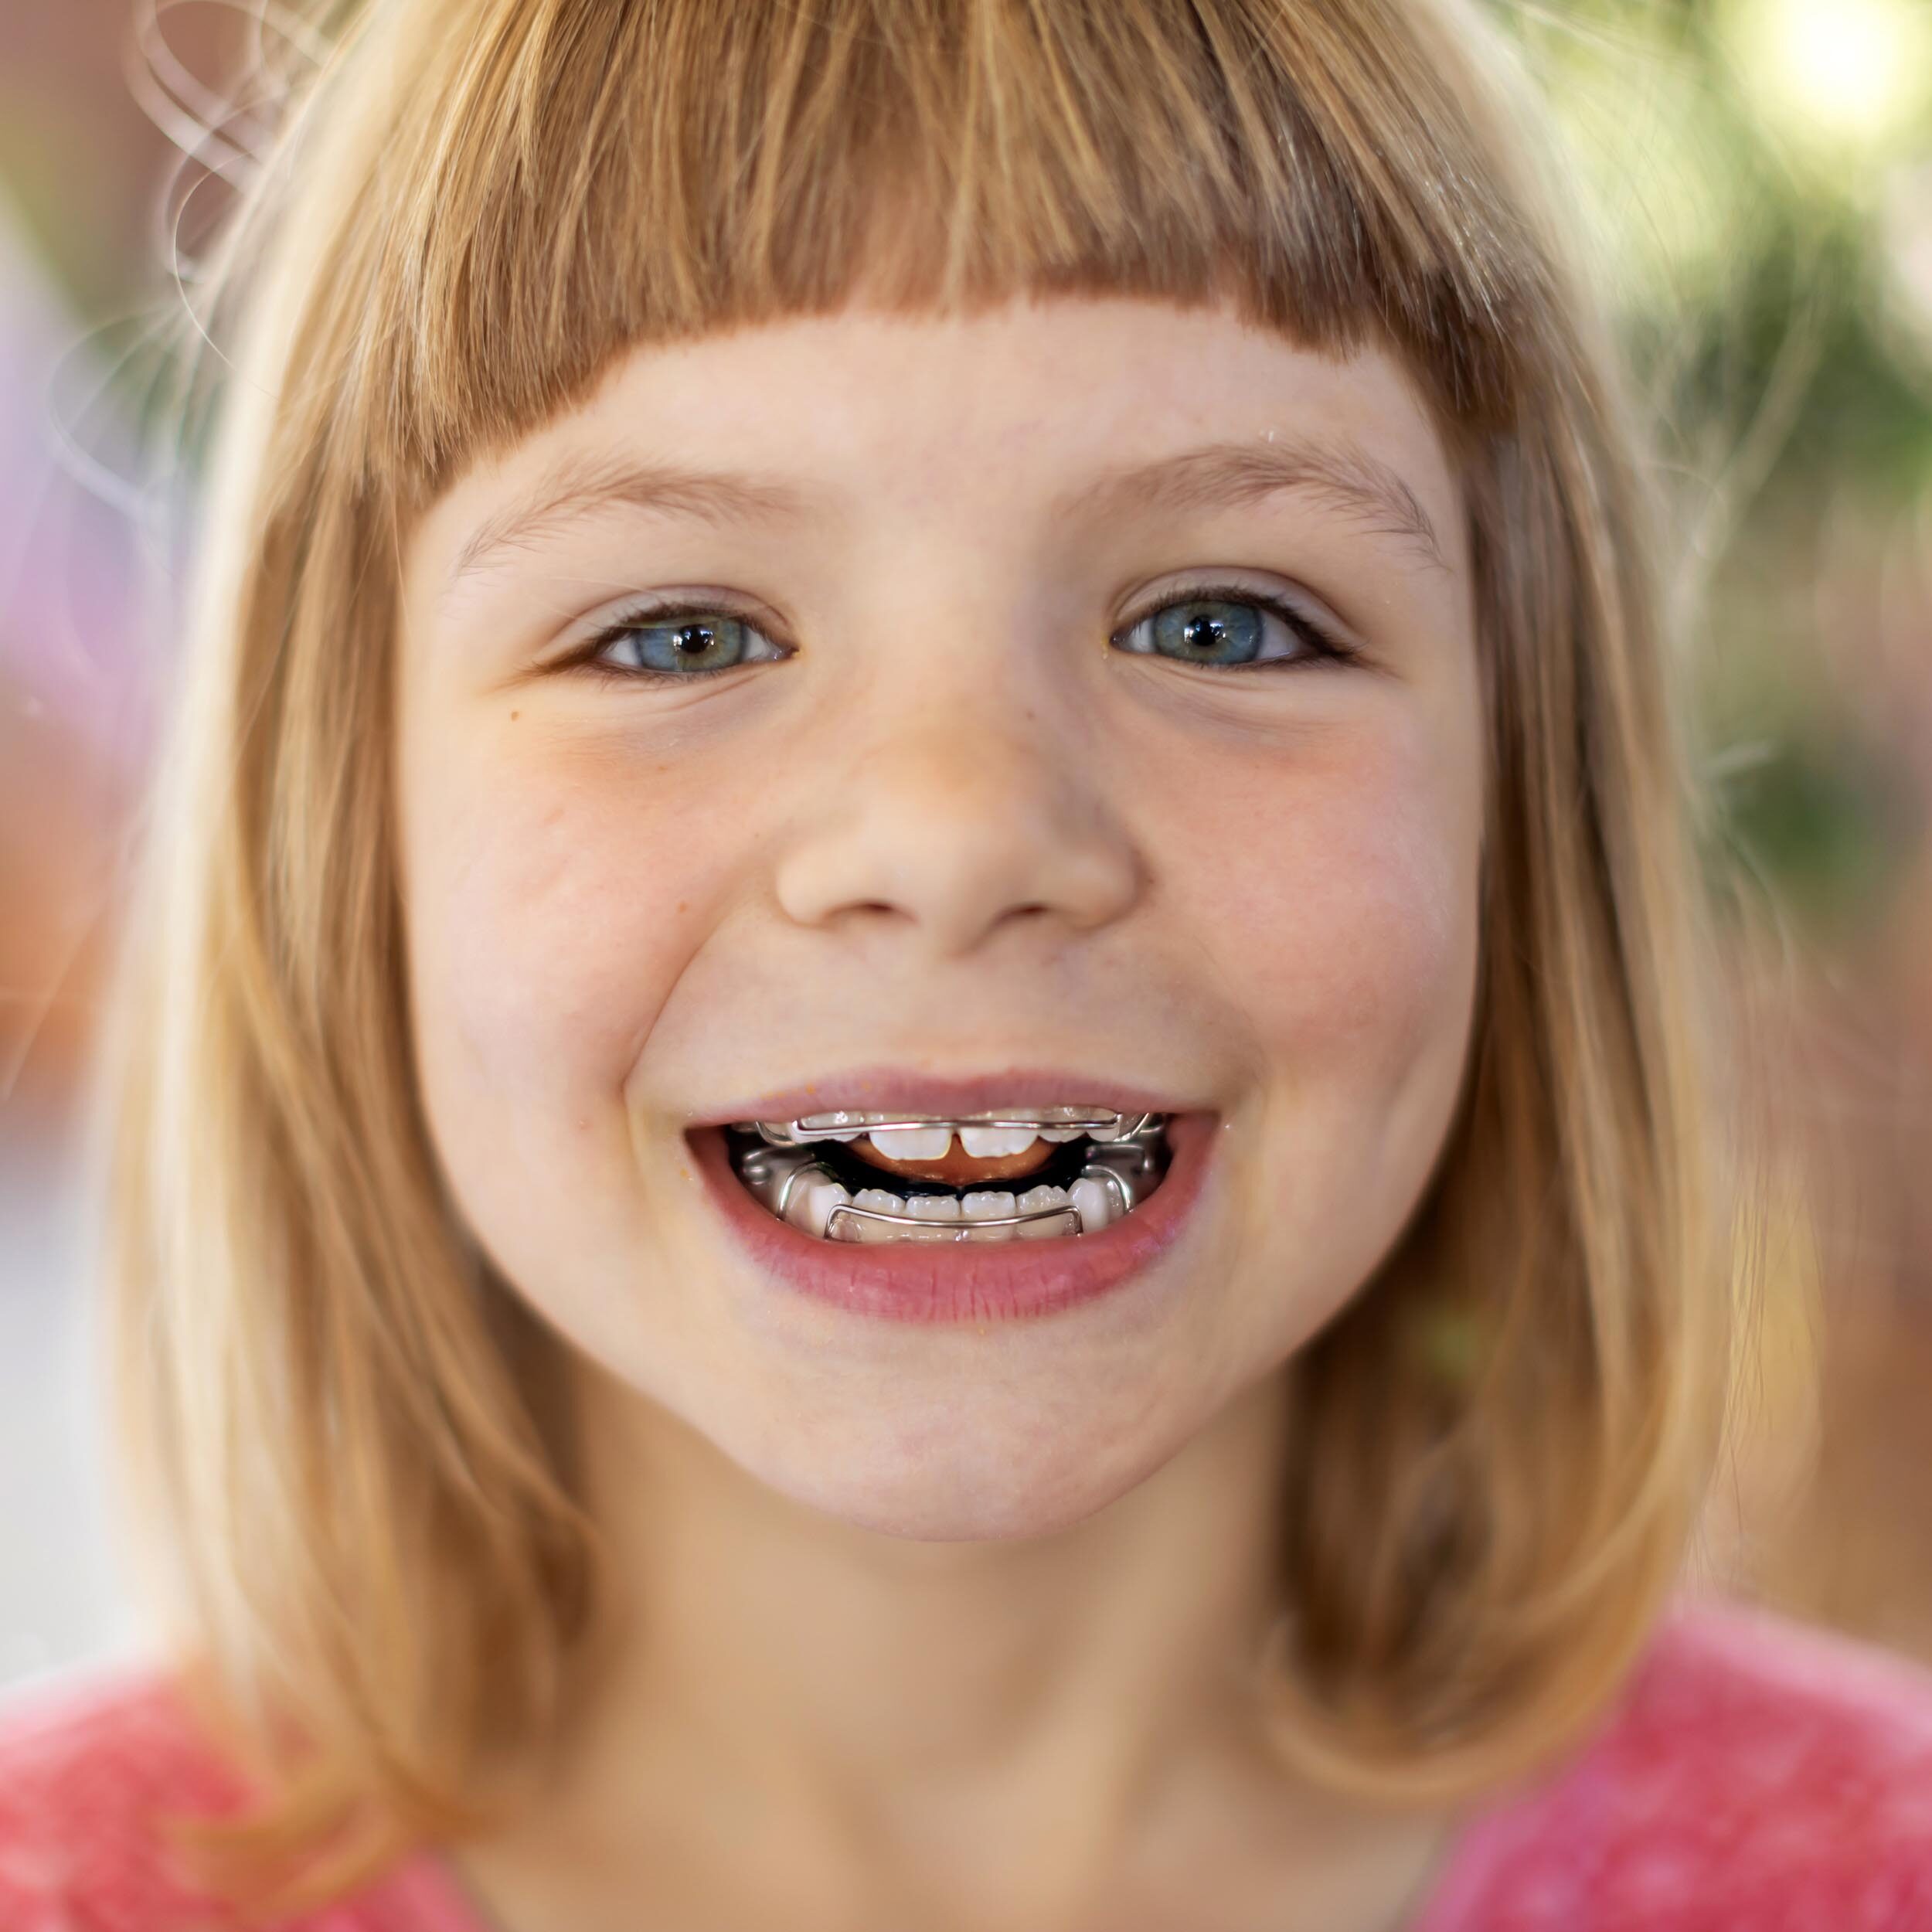 A smiling young girl with braces on her teeth, indicating successful orthodontic treatment.